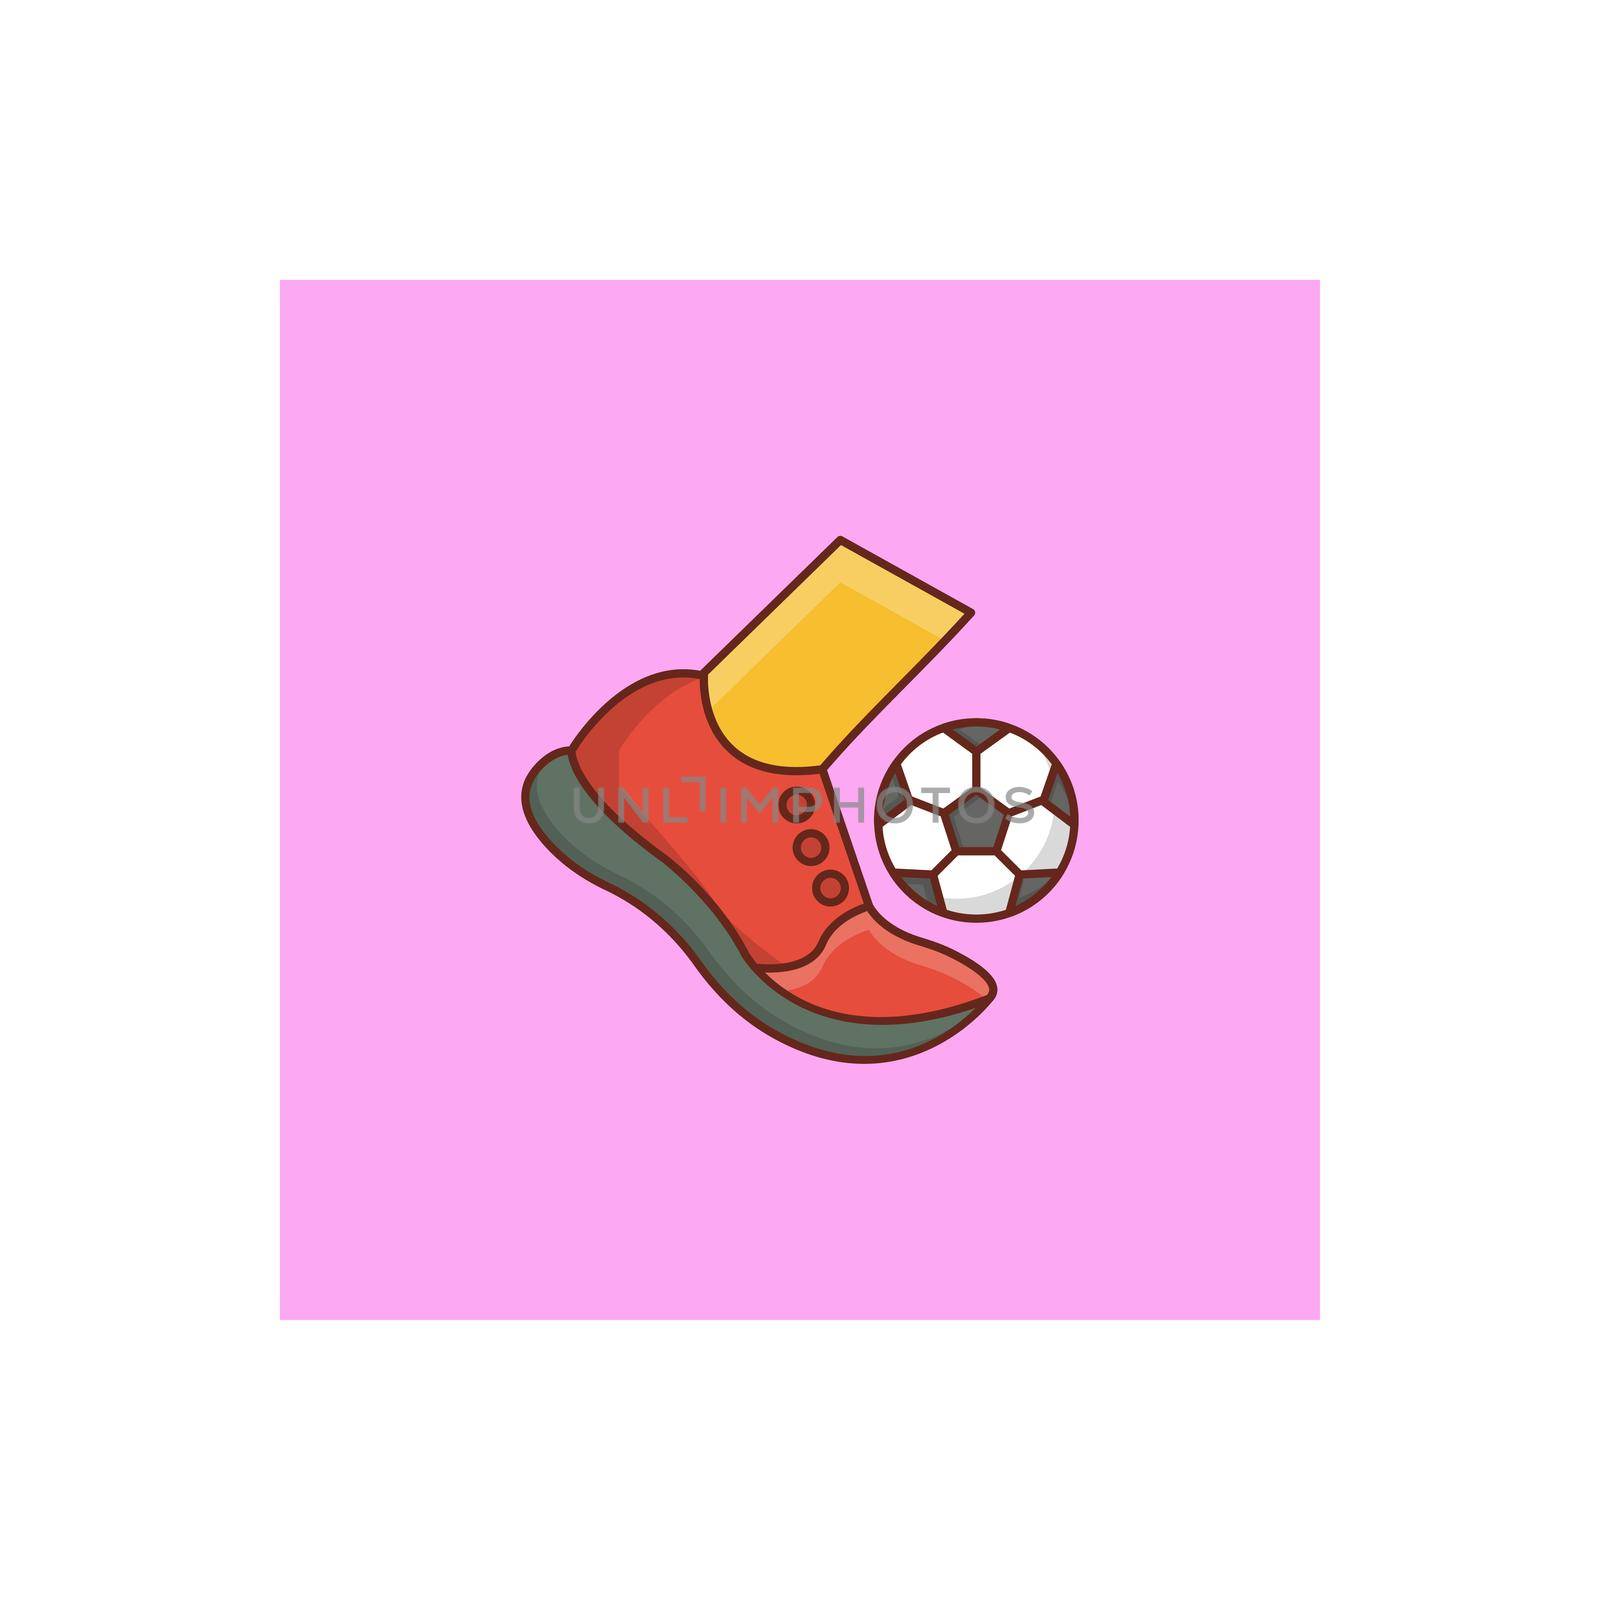 soccer Vector illustration on a transparent background. Premium quality symbols.Vector line flat color icon for concept and graphic design.